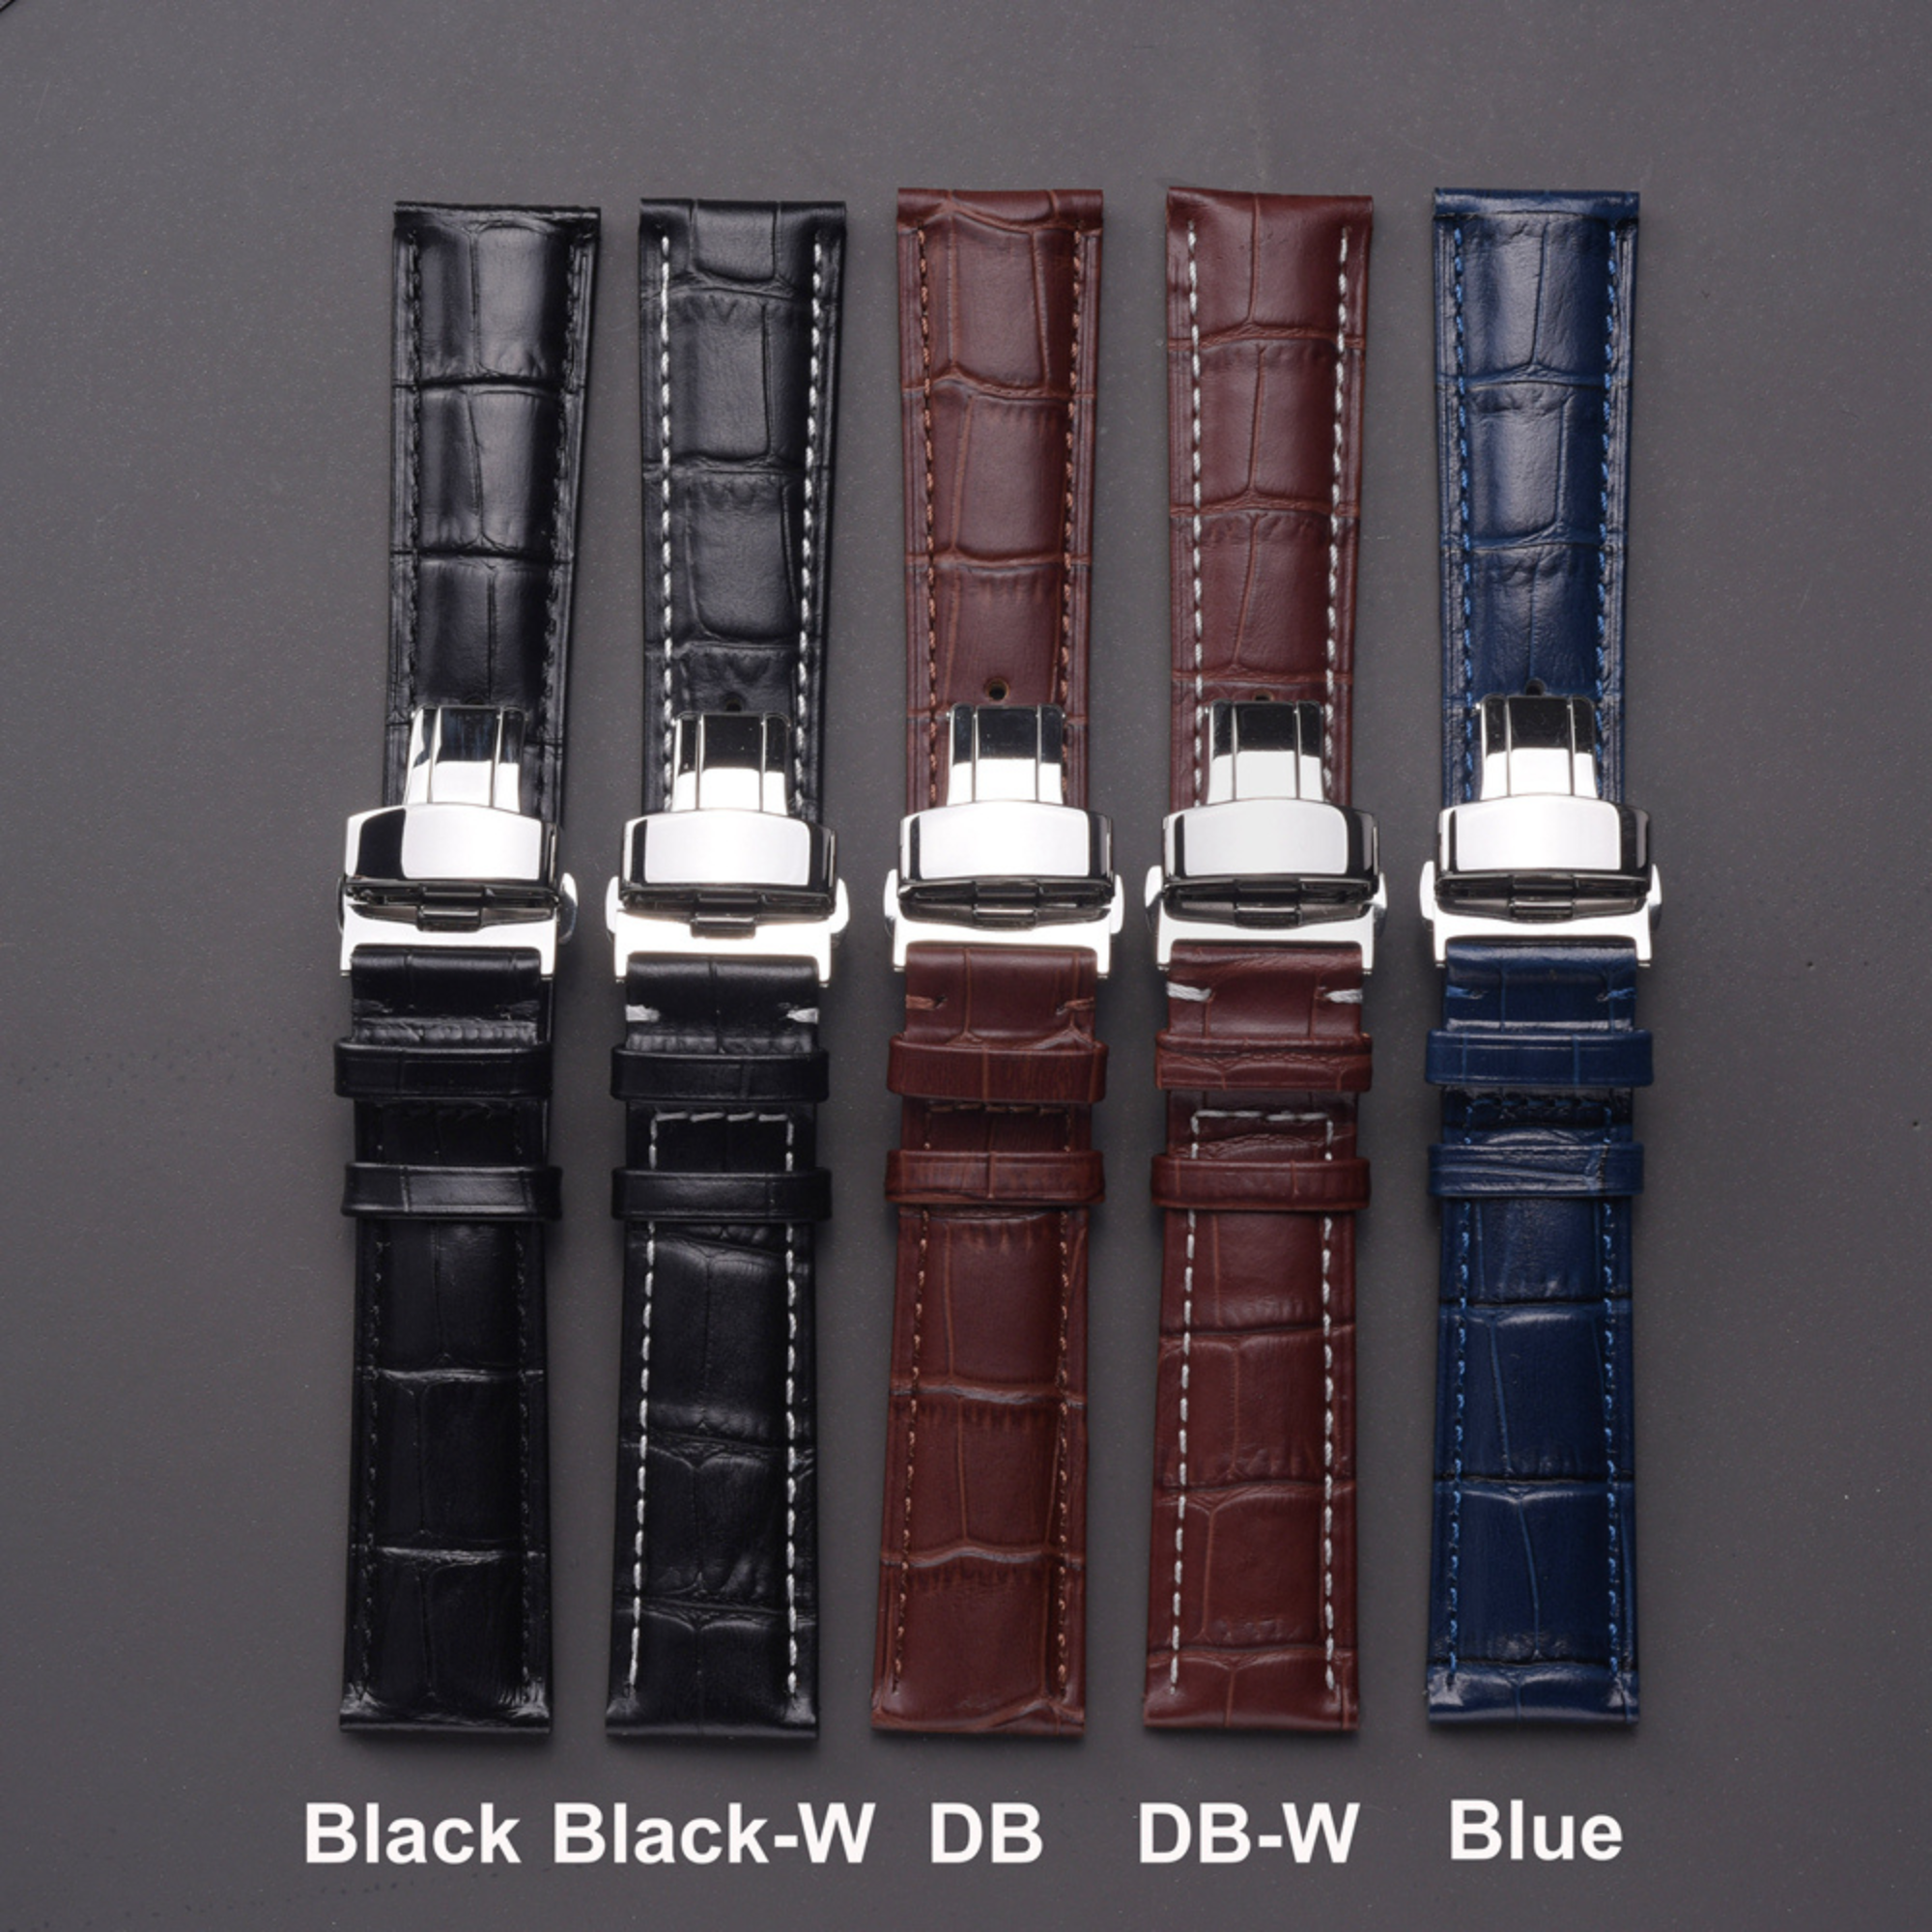 Quality Leather Watchbands Watch Band/Strap with butterfly buckle - Brown with White stiching (20 mm)